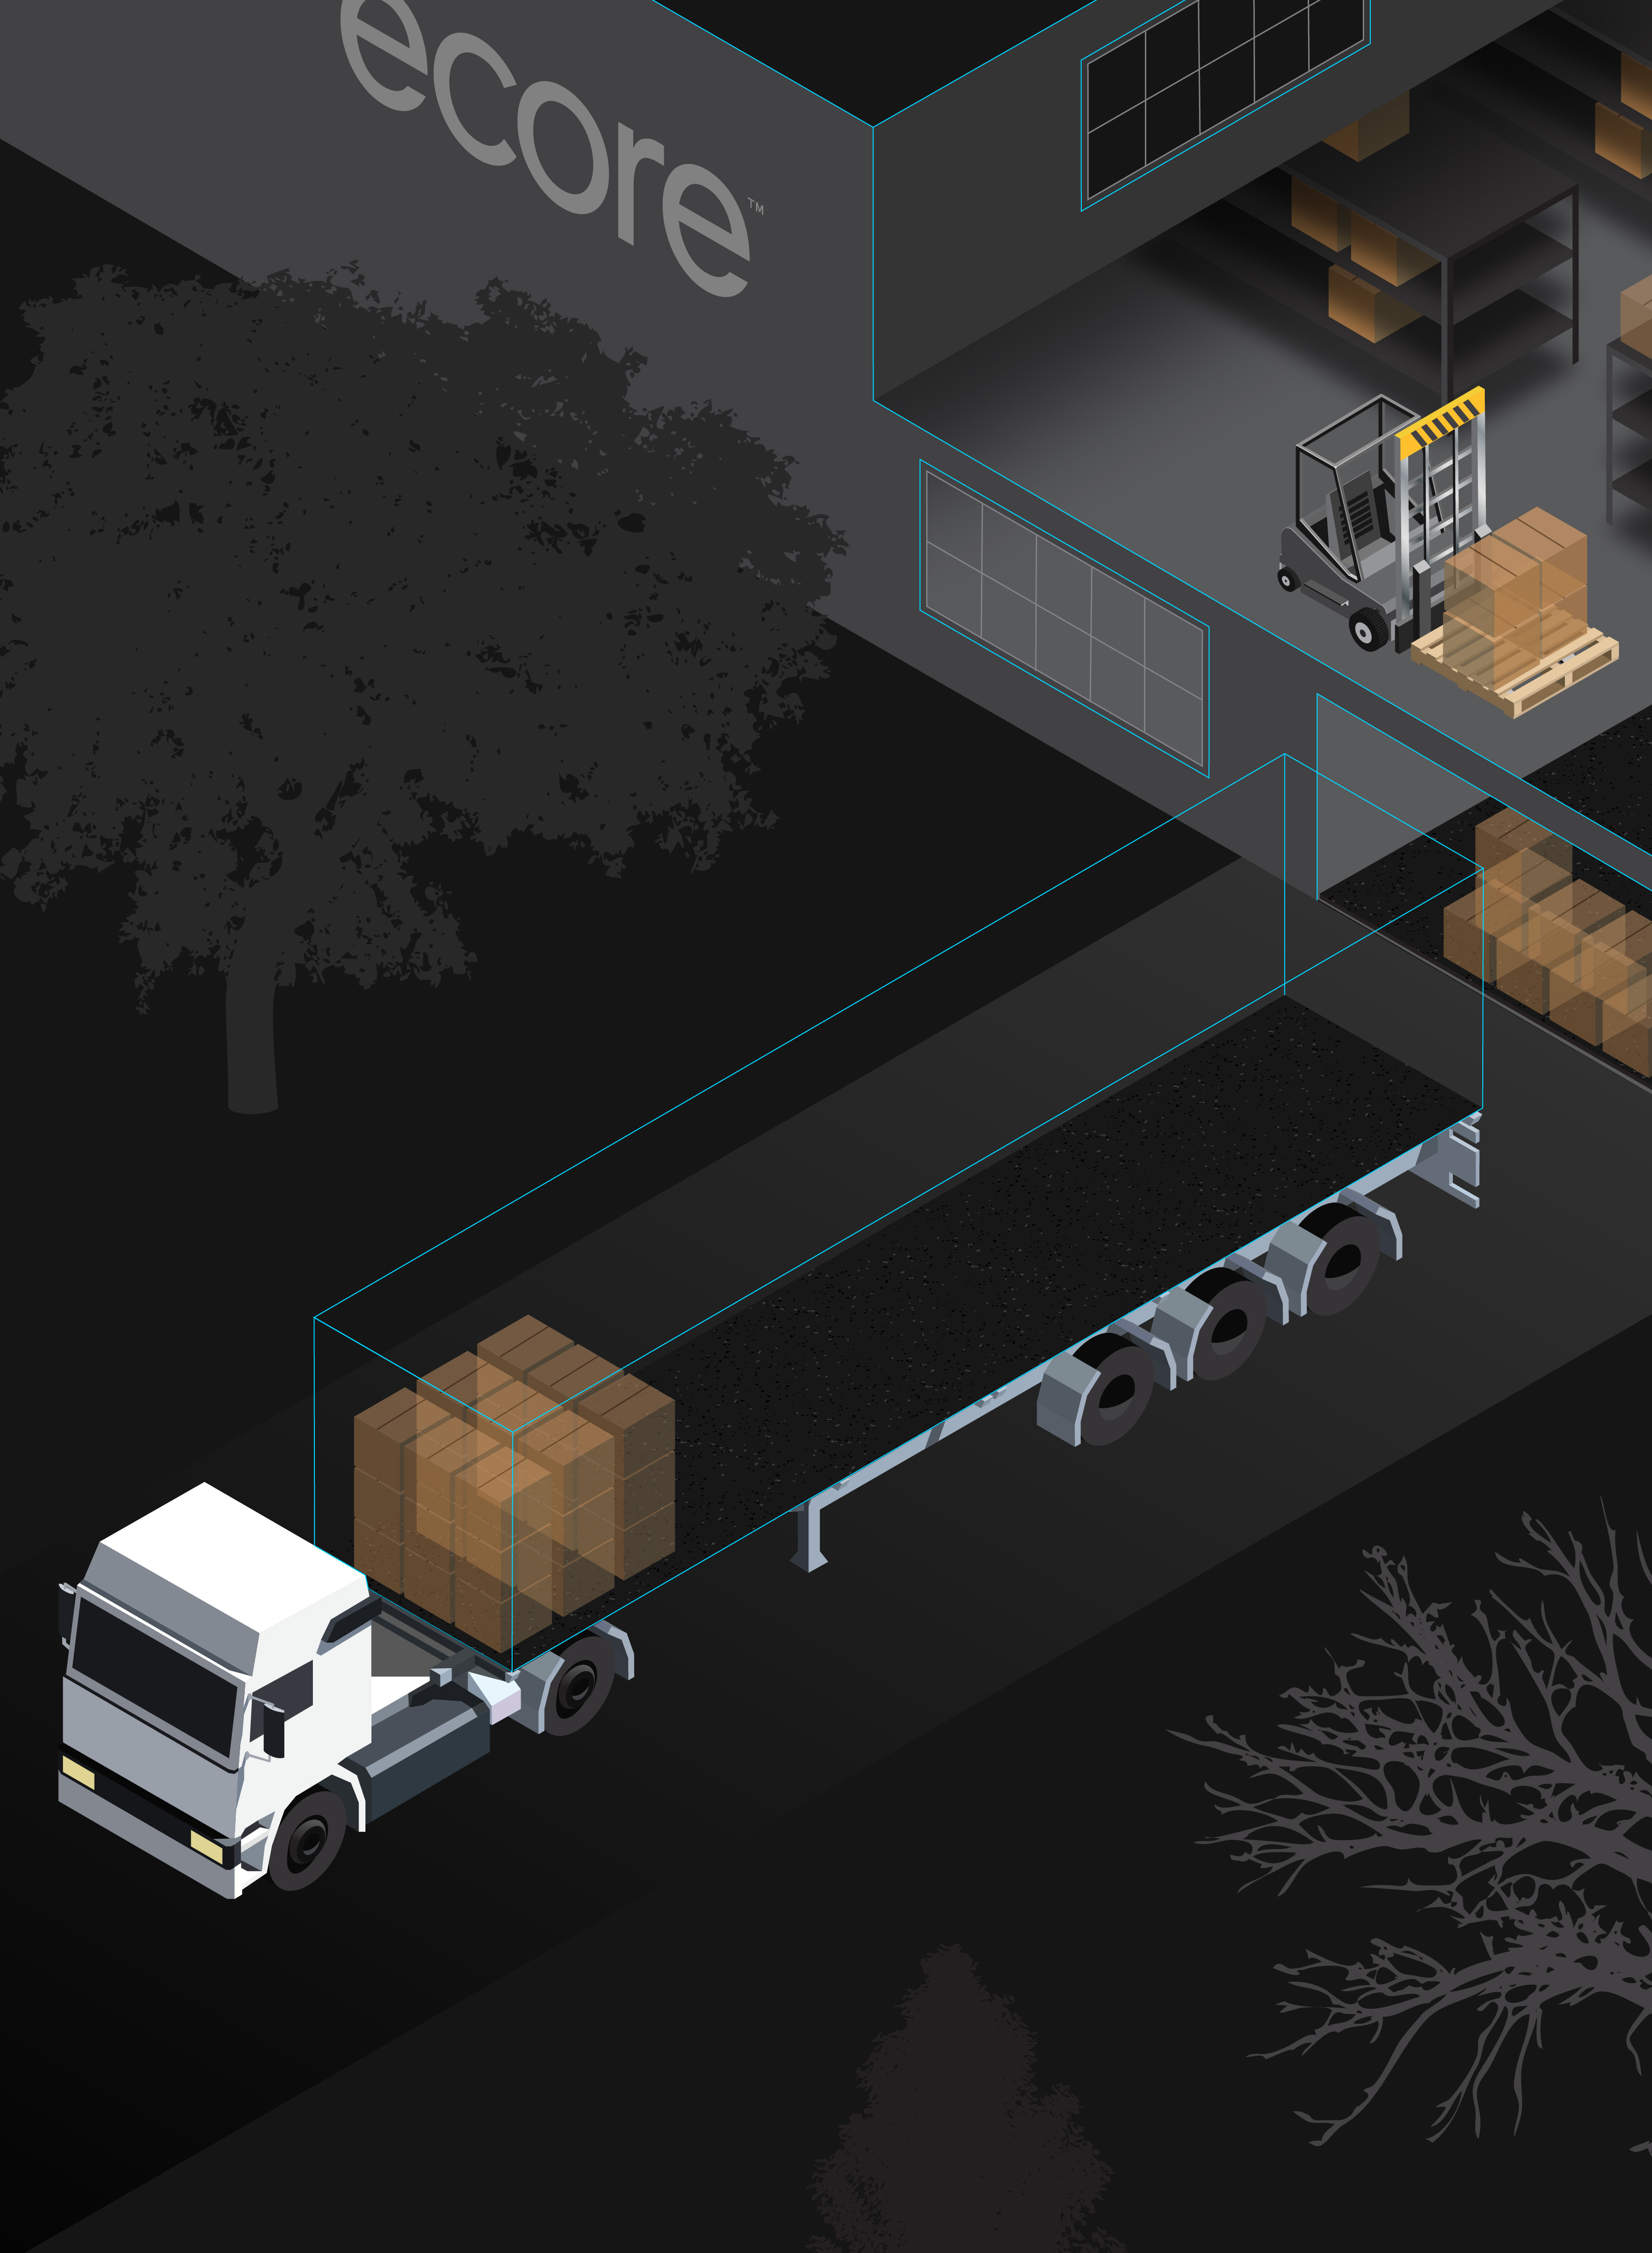 Blueprint of a transportation and semi-truck facility featuring Ecore flooring options in each room or space